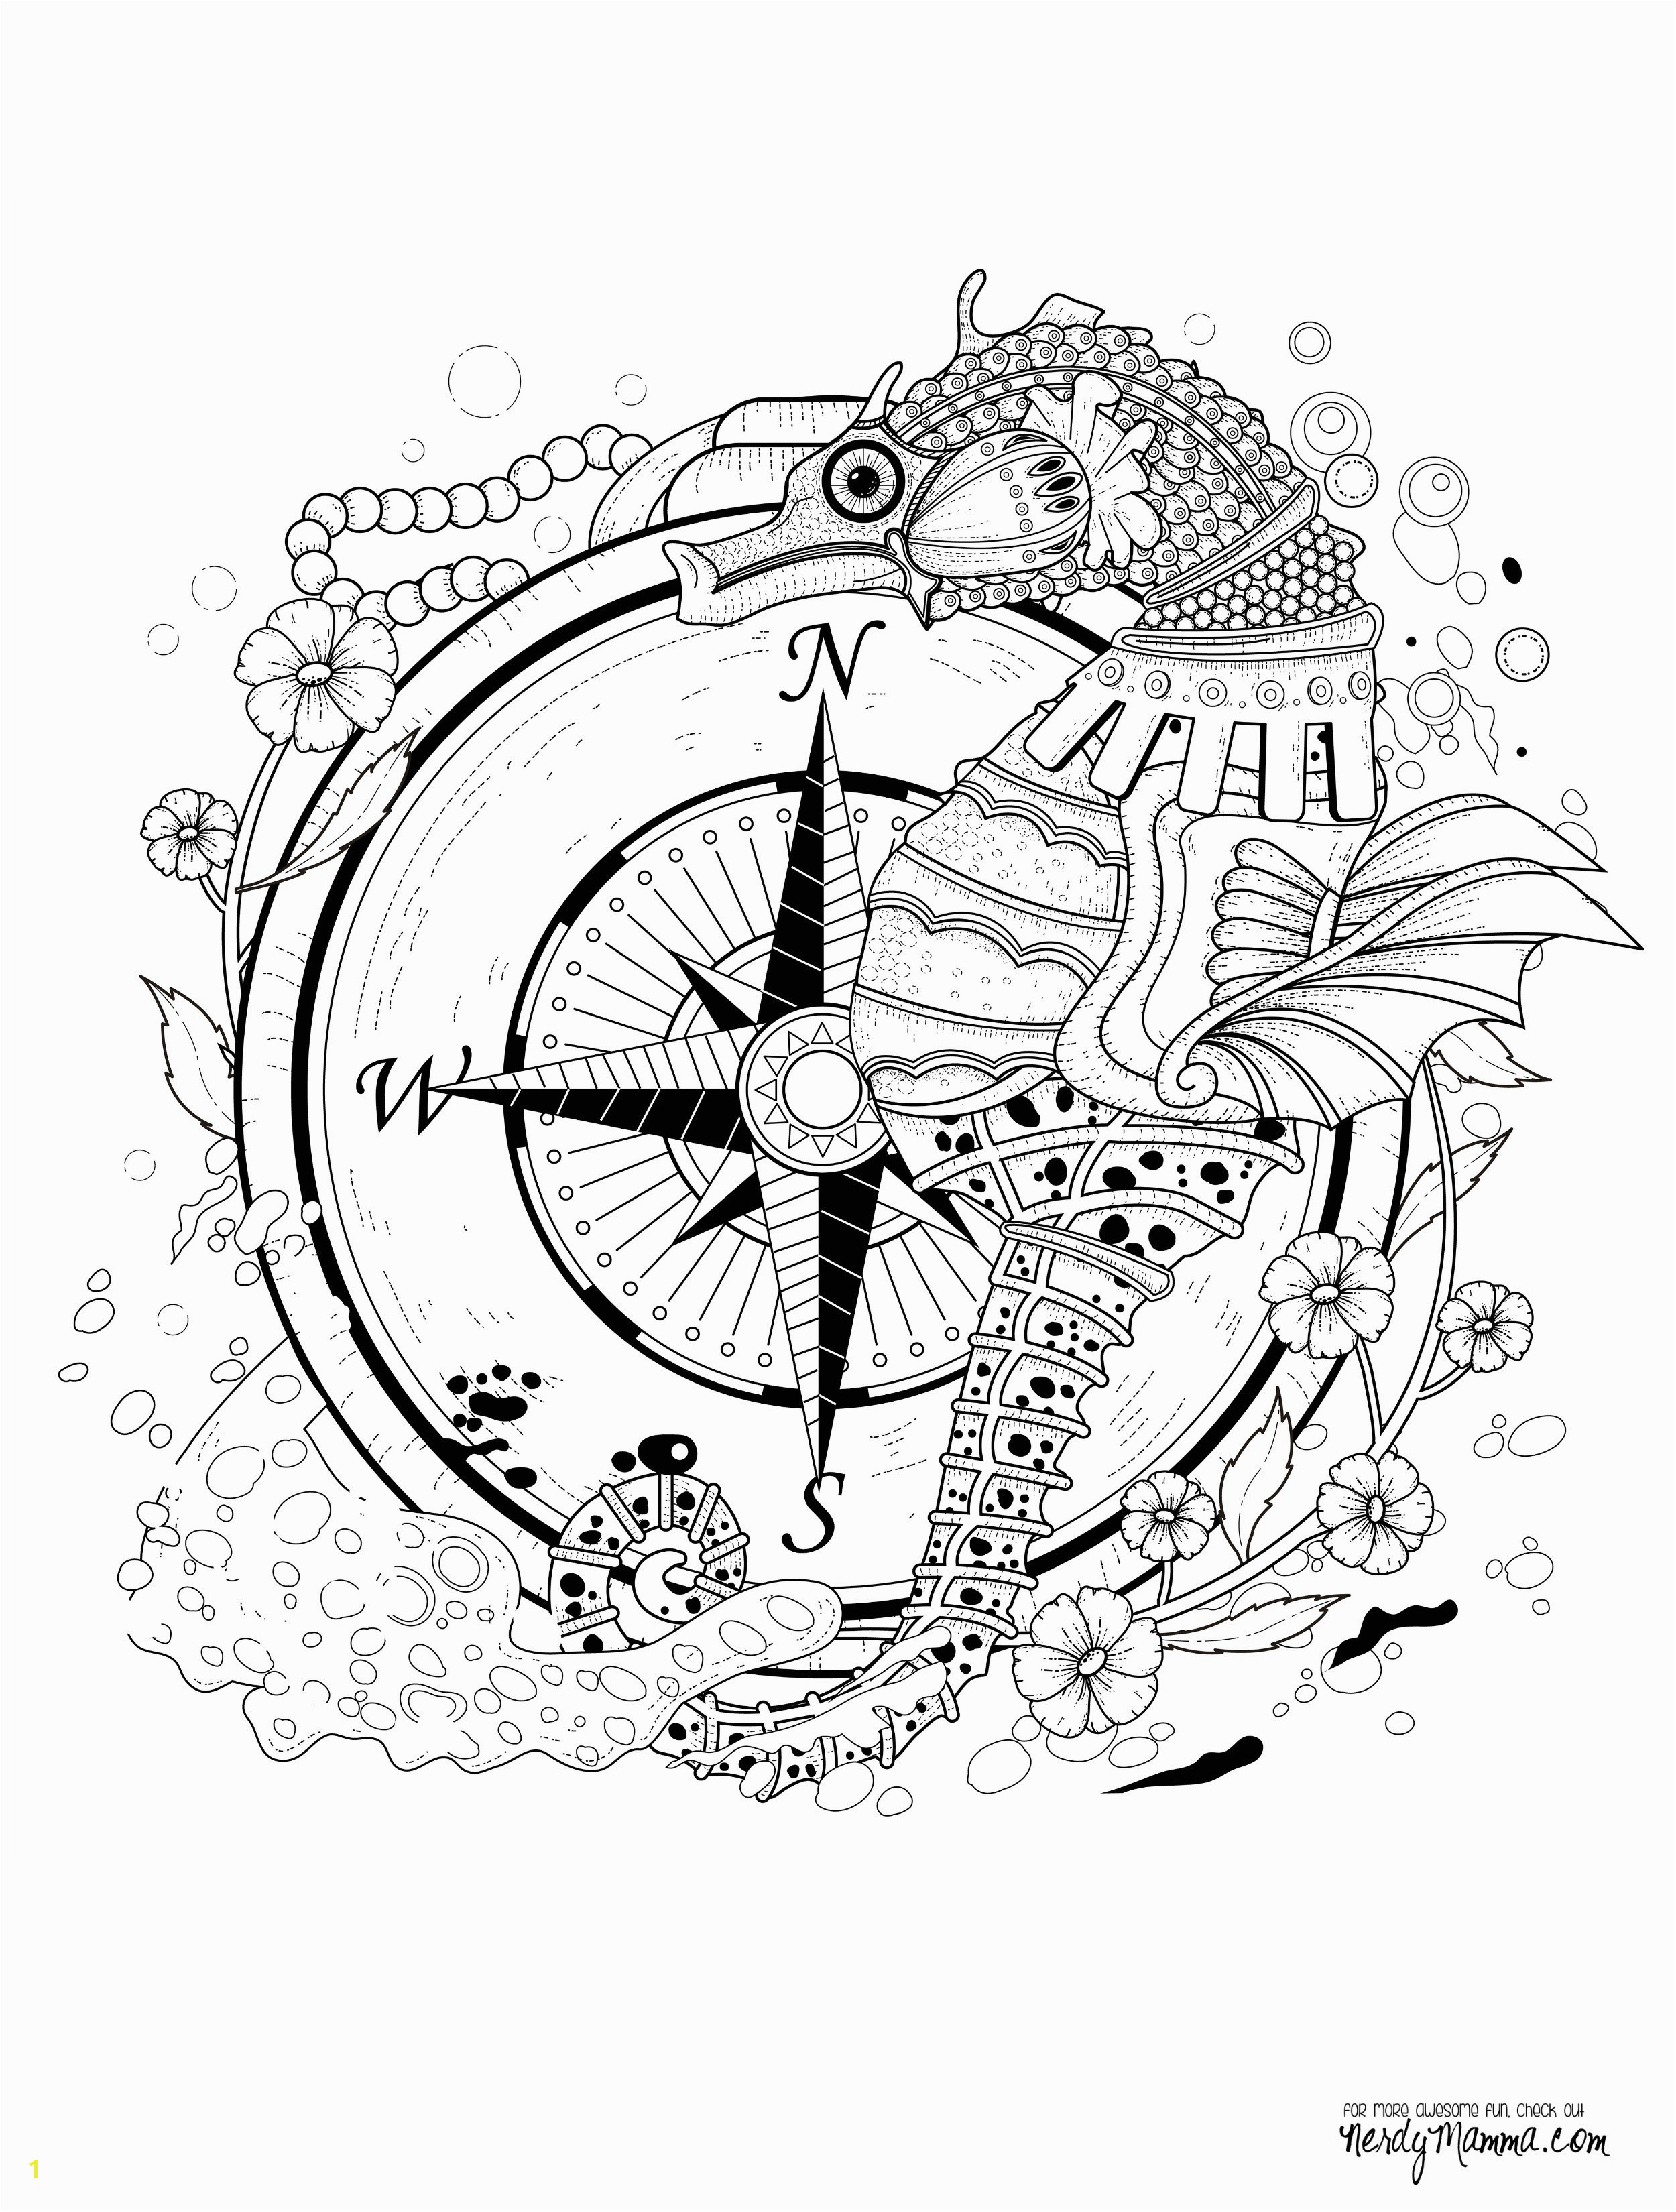 Seahorse Coloring Pages for Adults 11 Free Printable Adult Coloring Pages